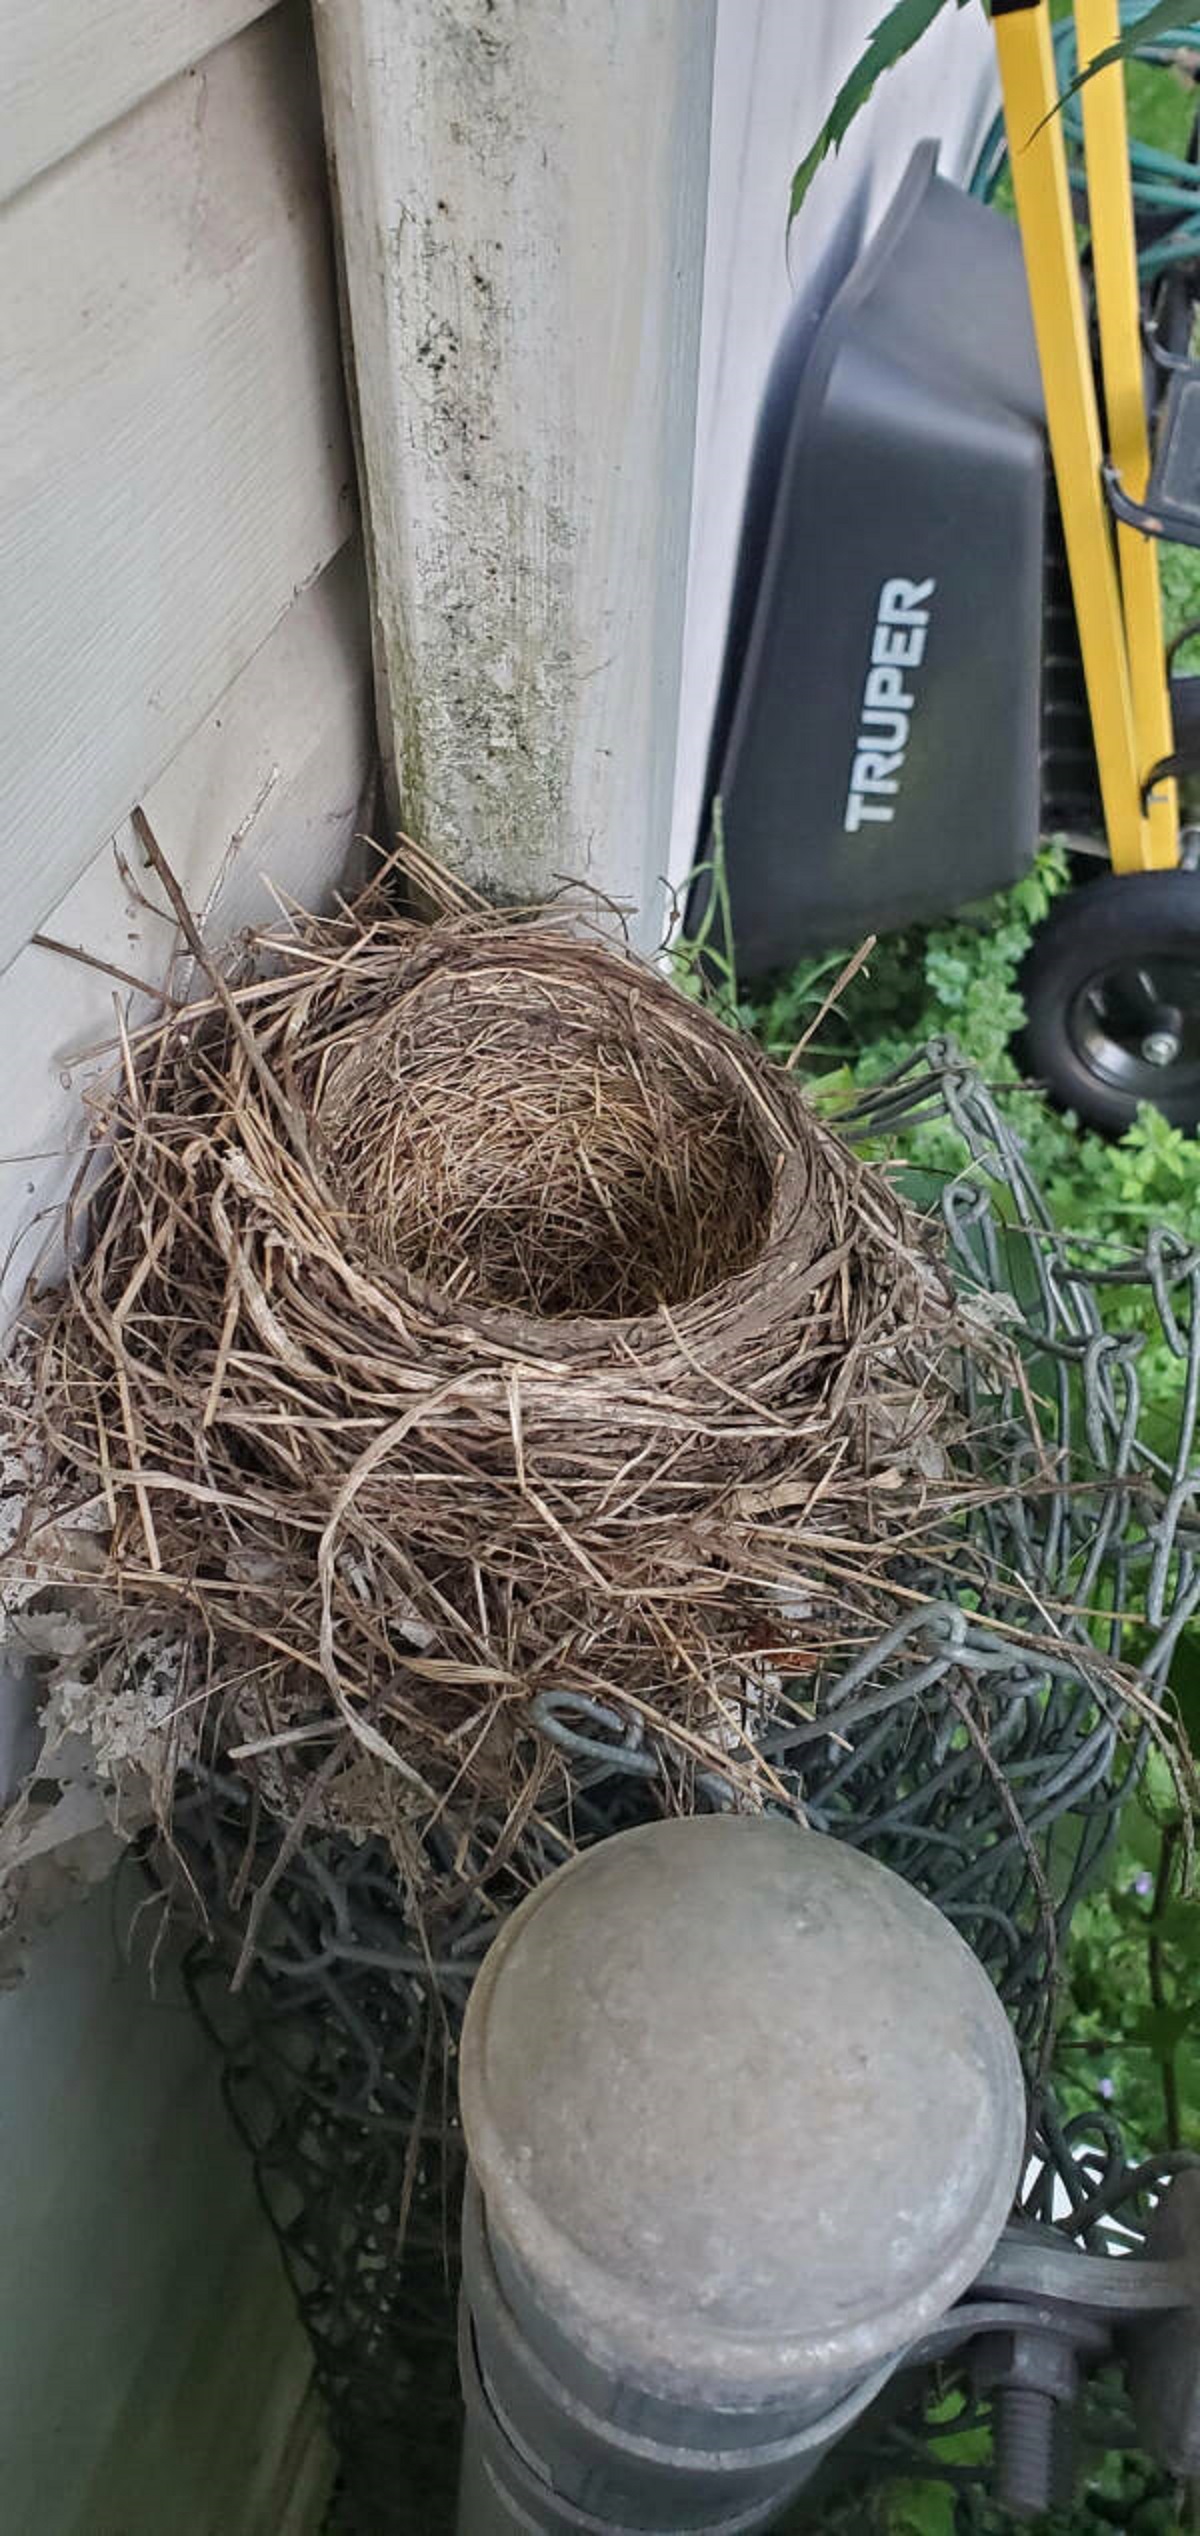 “5 days ago 3 Robins hatched in this nest. Yesterday I saw the mama Robin feeding her babies. Today the nest is empty…”